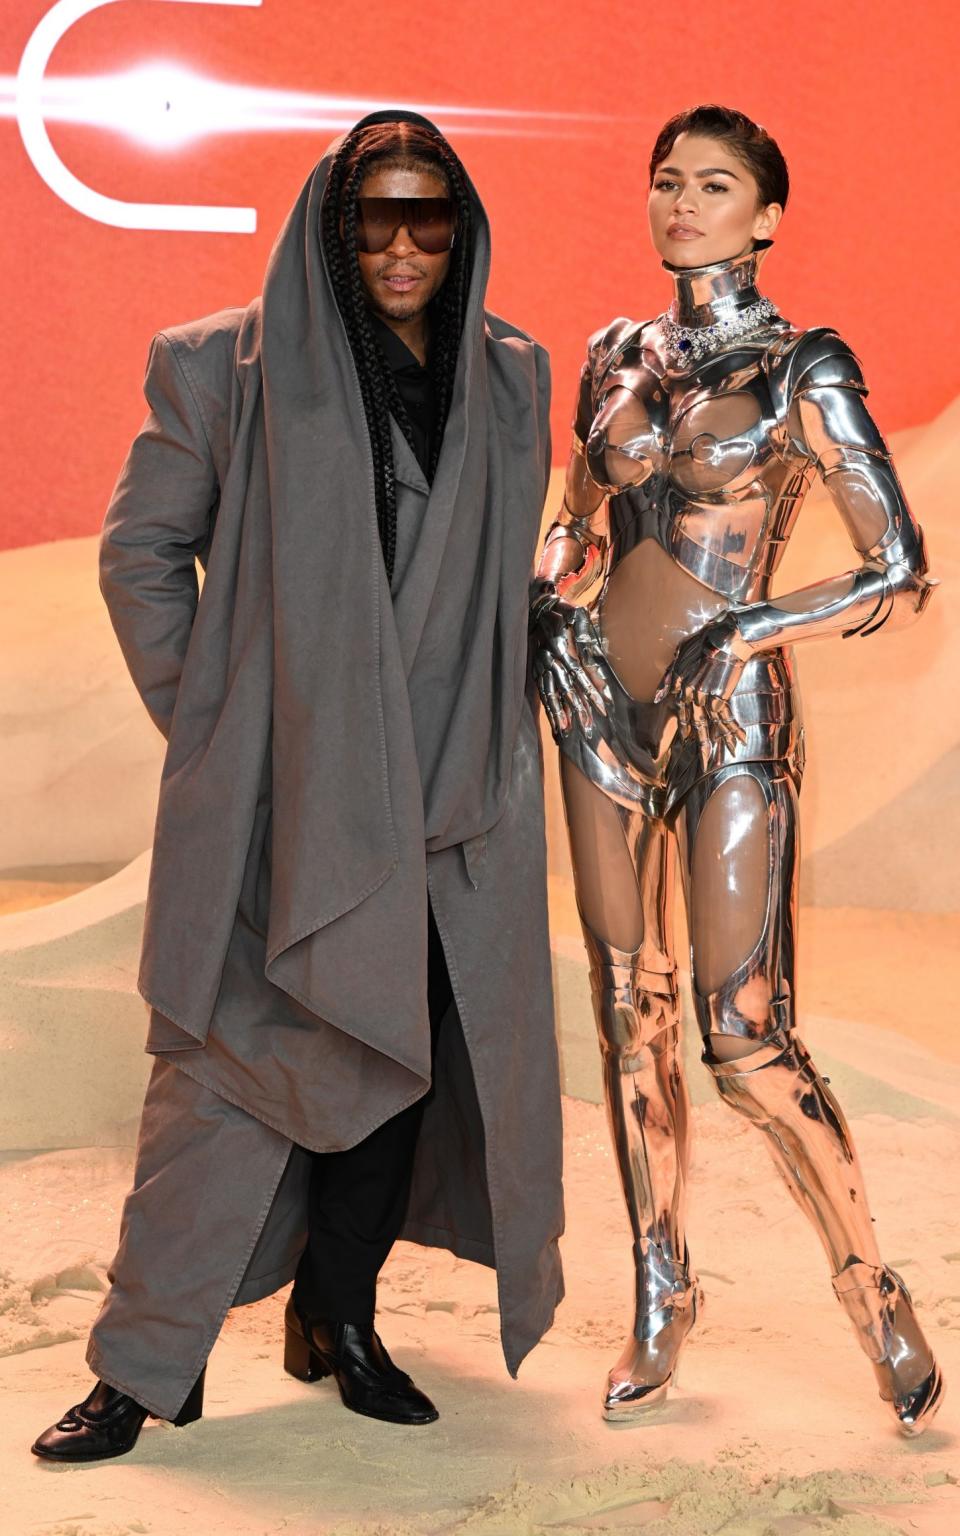 Zendaya's stylist, Law Roach, accompanied her on the red carpet for the film's London premiere, for which she wore a silver Thierry Mugler robot suit